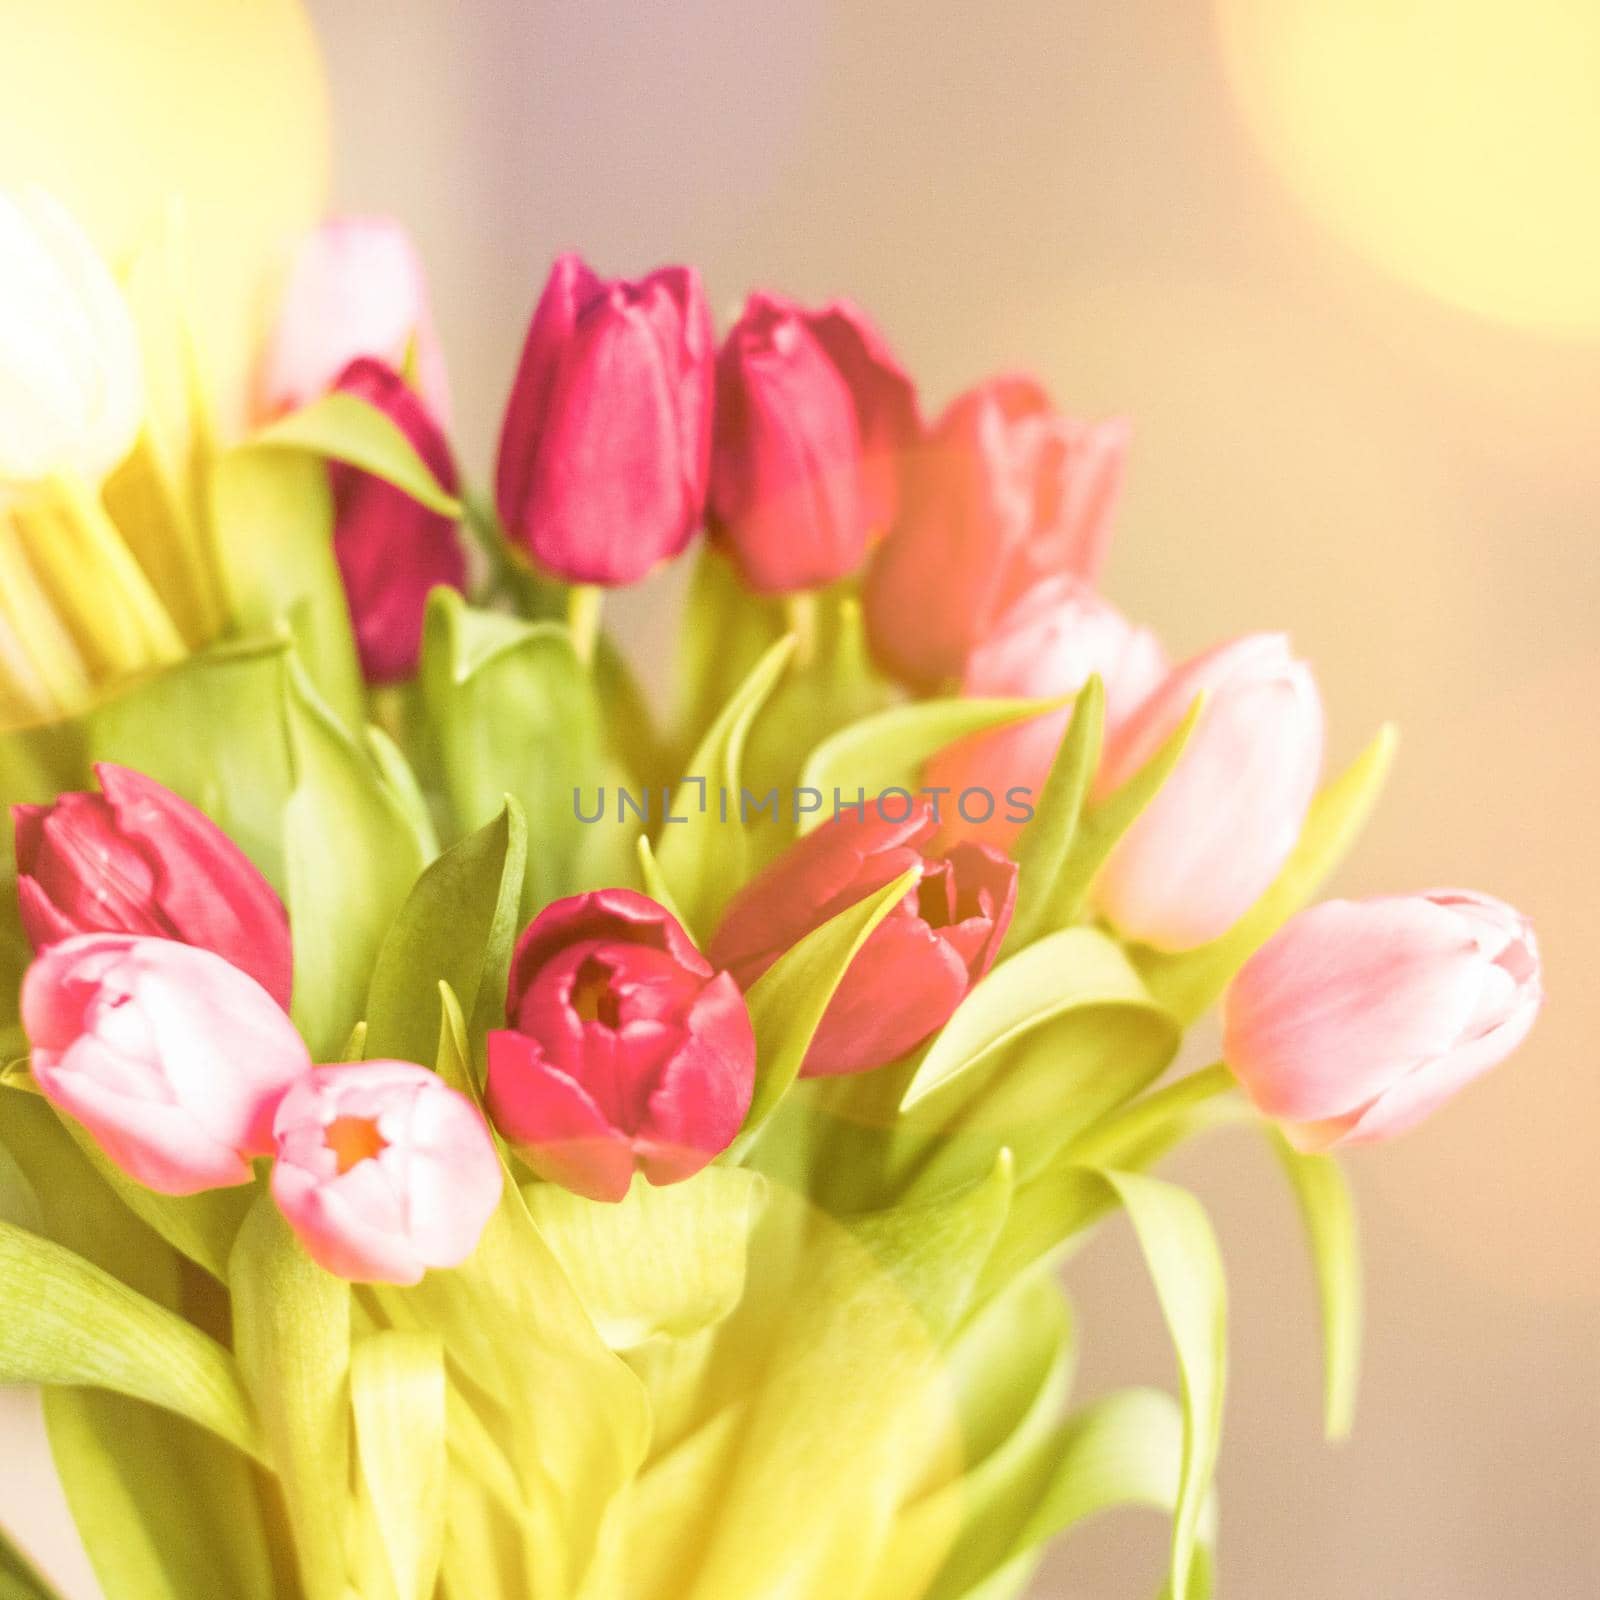 tulips in sunlight - floral, spring holidays and birthday gift styled concept